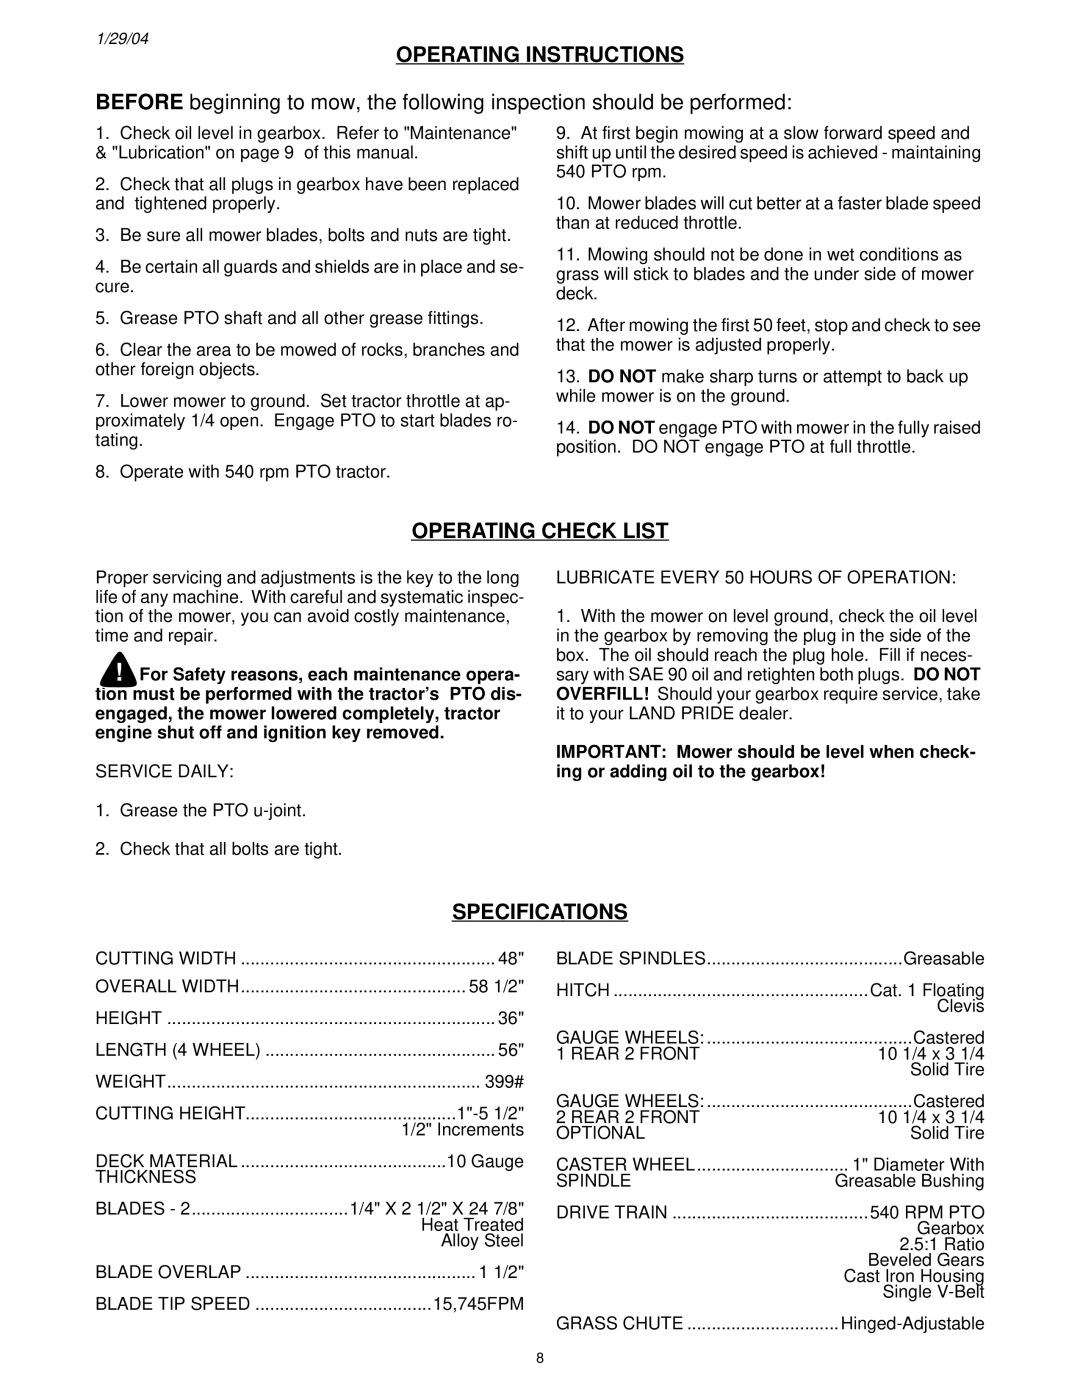 Land Pride FD2548 manual Operating Instructions, Operating Check List, Specifications 